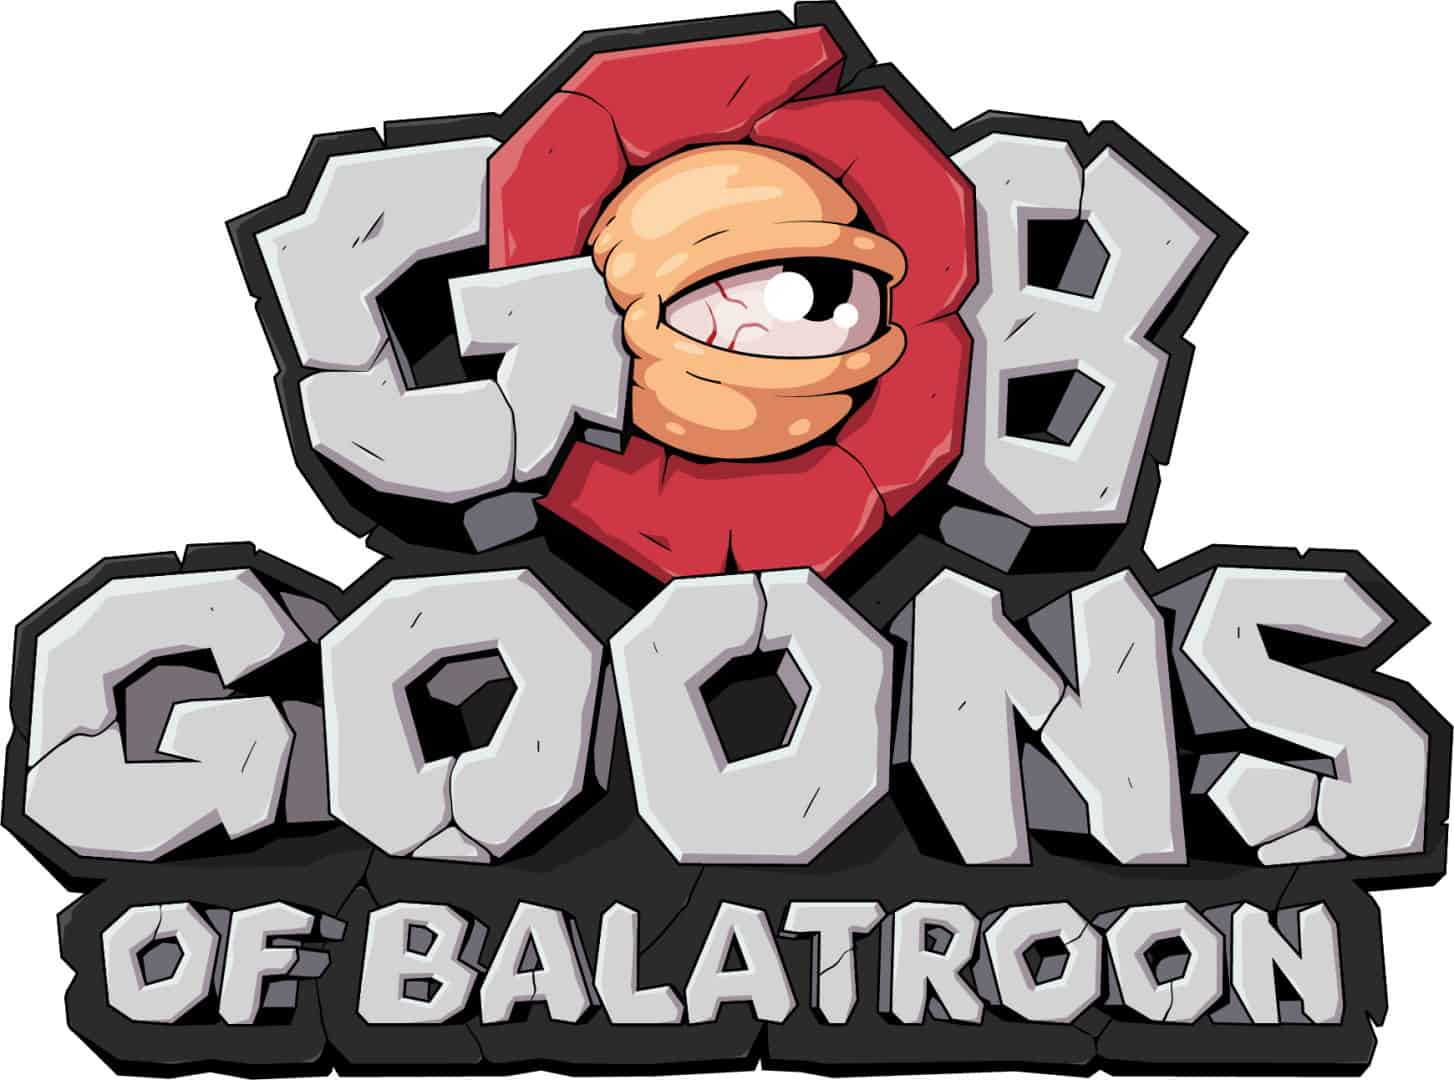 Goons-of-balatroon-secured-ido-to-take-place-on-poolz